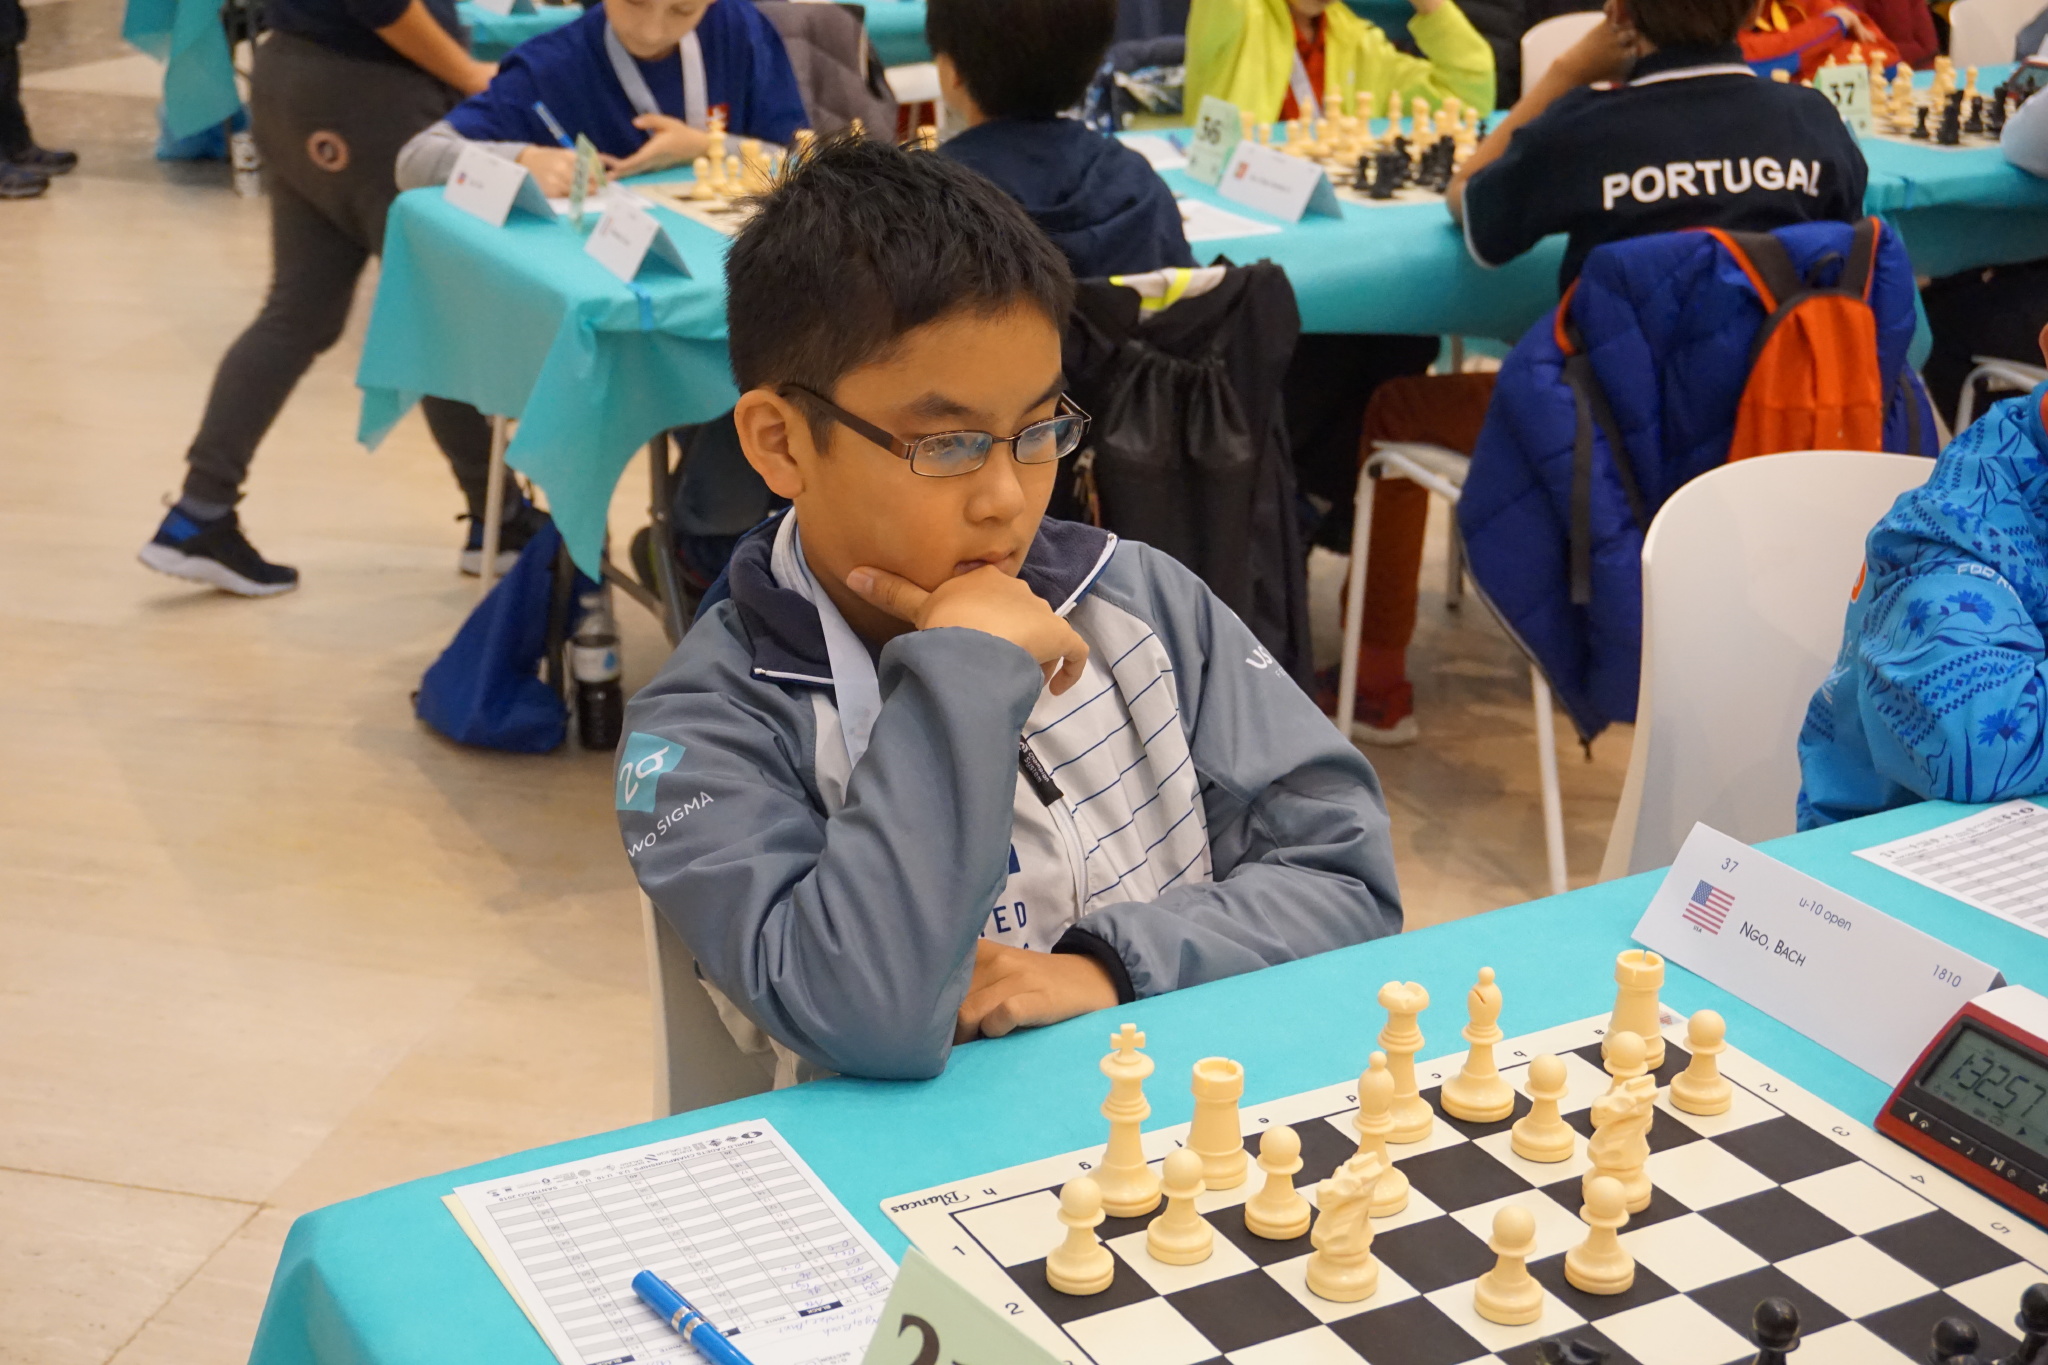 US Chess on X: While @FabianoCaruana is fighting the overall world  championship, 8-year-old Yuvraj Chennareddy from IL has a 7/7 perfect score  at the World U-8 Championship in Spain. He is on